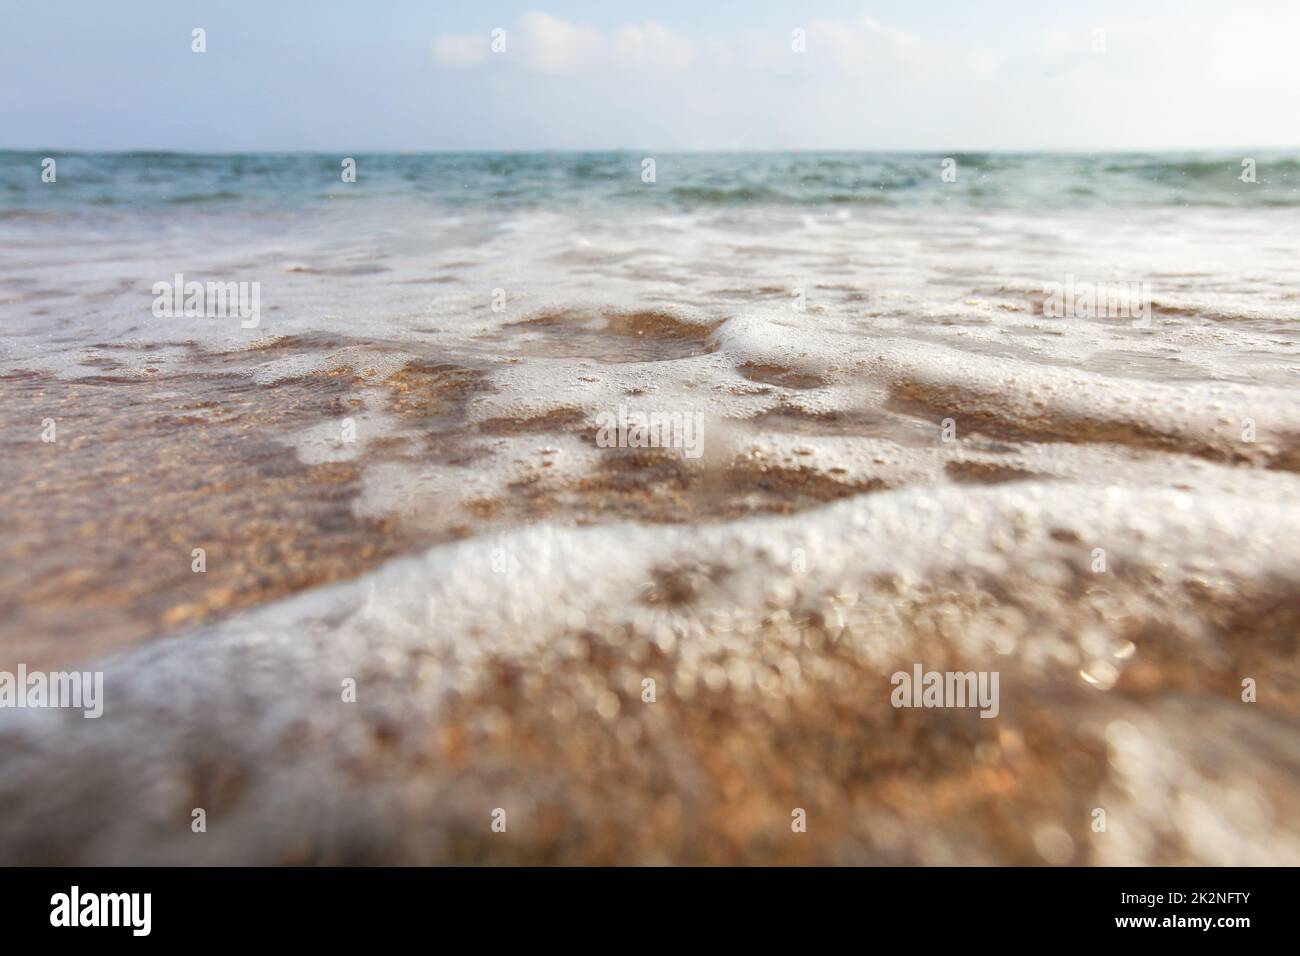 Low angle, camera on the ground, lens covered with water drops to emphasise wetness - close up of shallow sea waves washing beach sand. Abstract marine background. Stock Photo